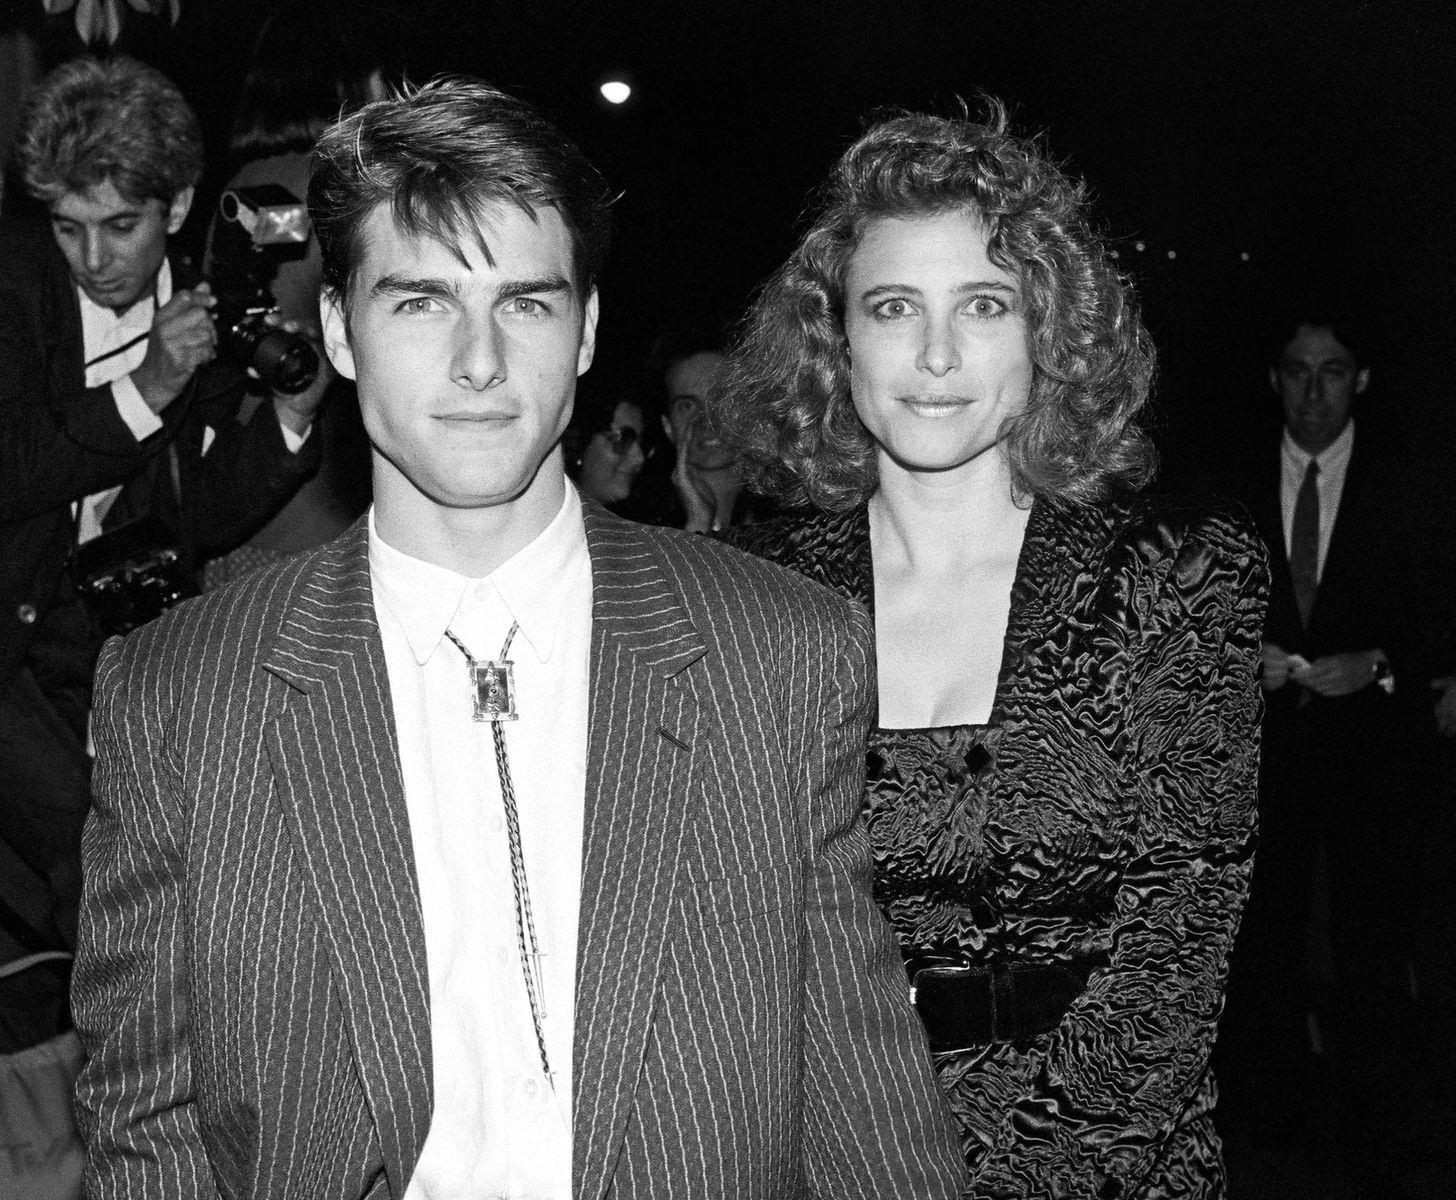 <p>The partnership would last three years. According to <a href="https://www.instyle.com/celebrity/tbt-tom-cruise-mimi-rogers-relationship">Andrew Morton’s unauthorized Tom Cruise biography</a>, the actors had this to say when they jointly announced their split: “While there have been positive aspects to our marriage, there were some issues which could not be resolved even after working on them for a period of time.”</p>